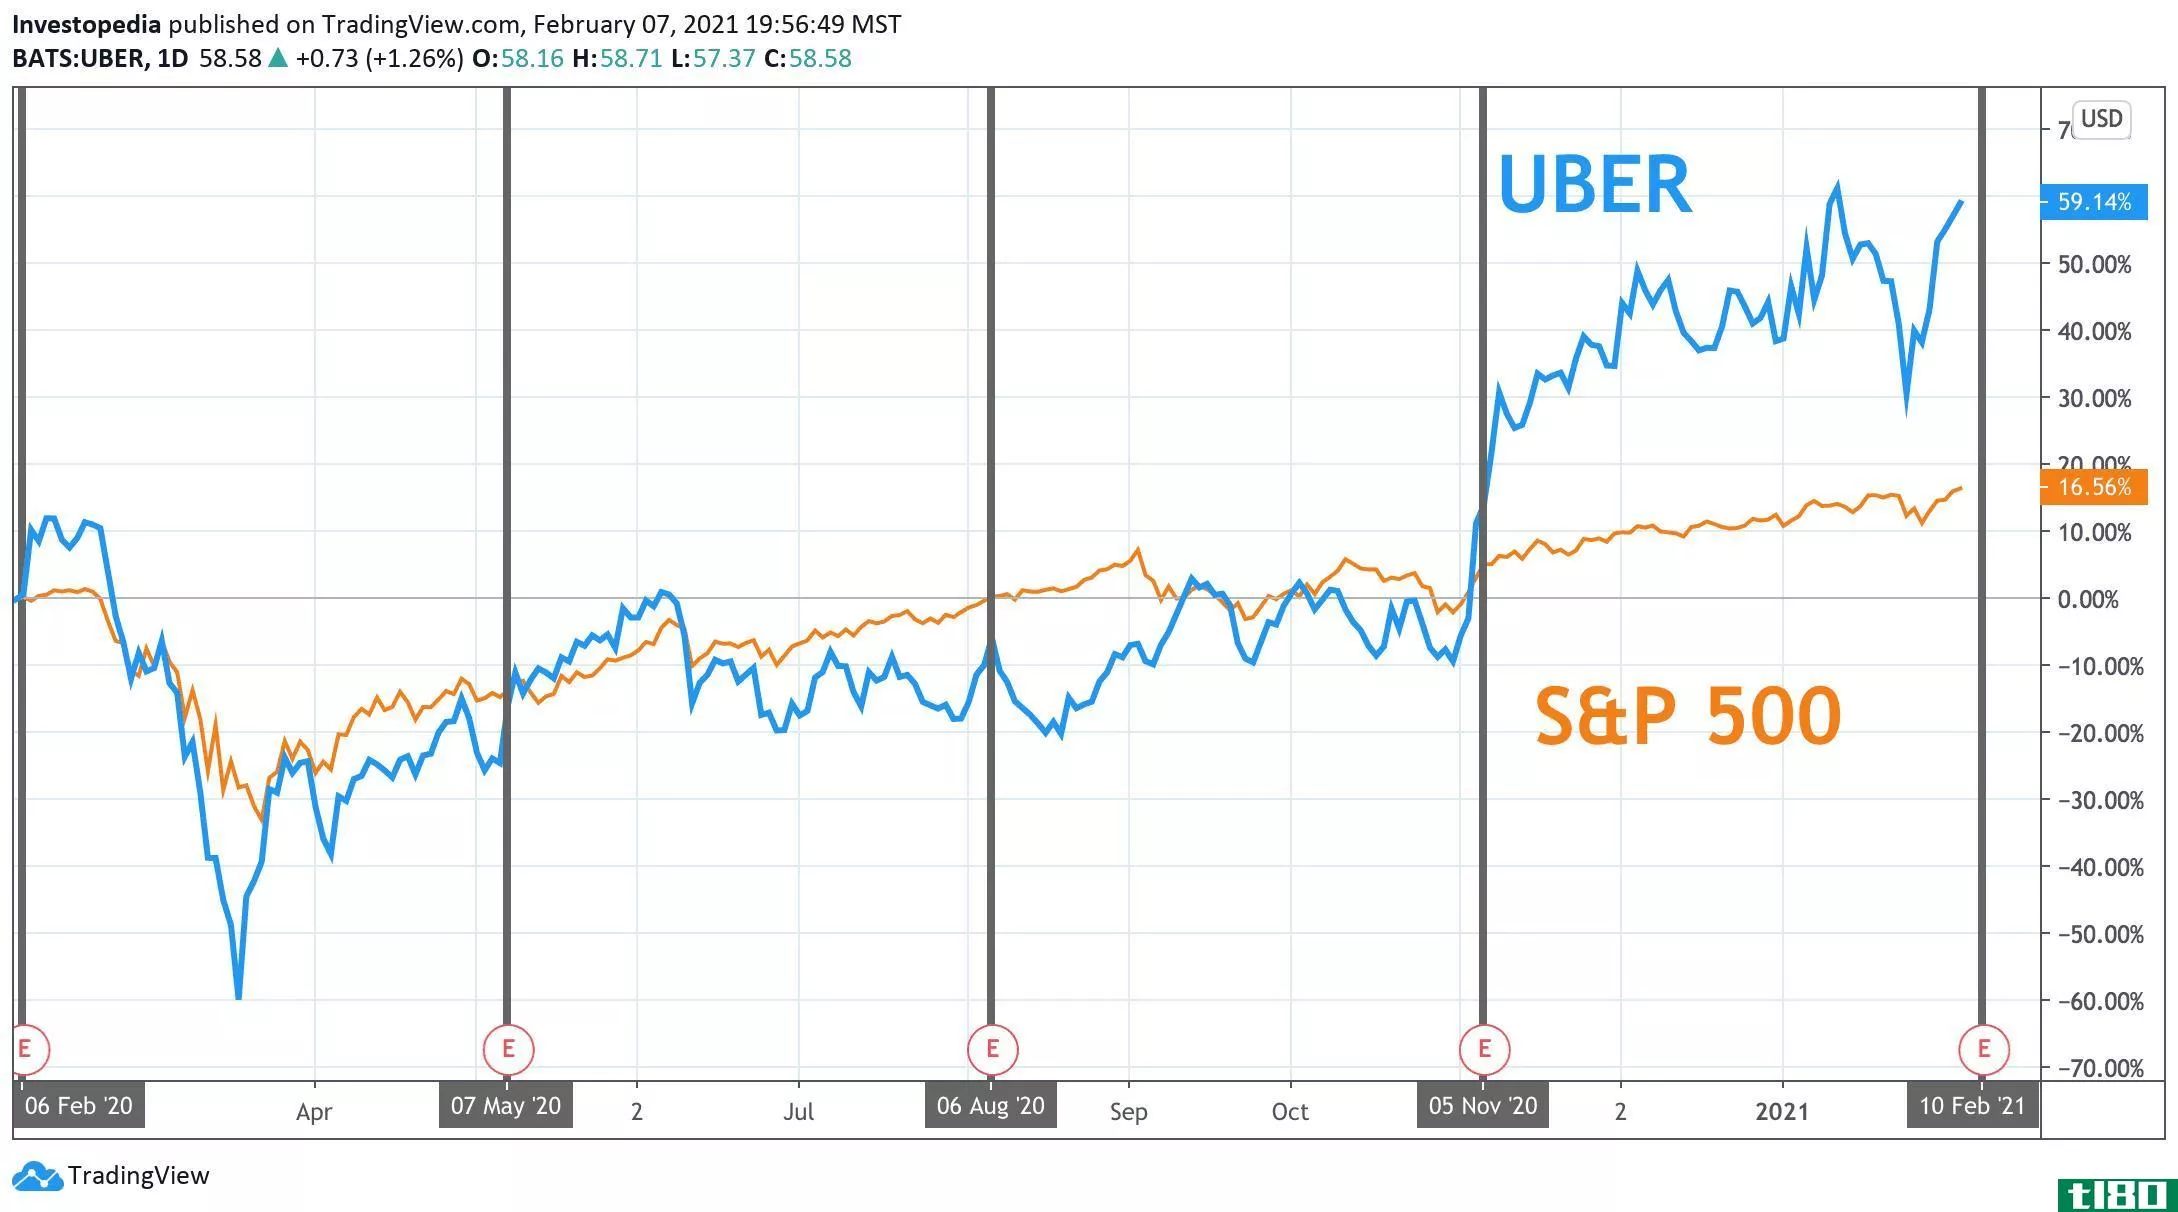 One Year Total Return for S&P 500 and Uber